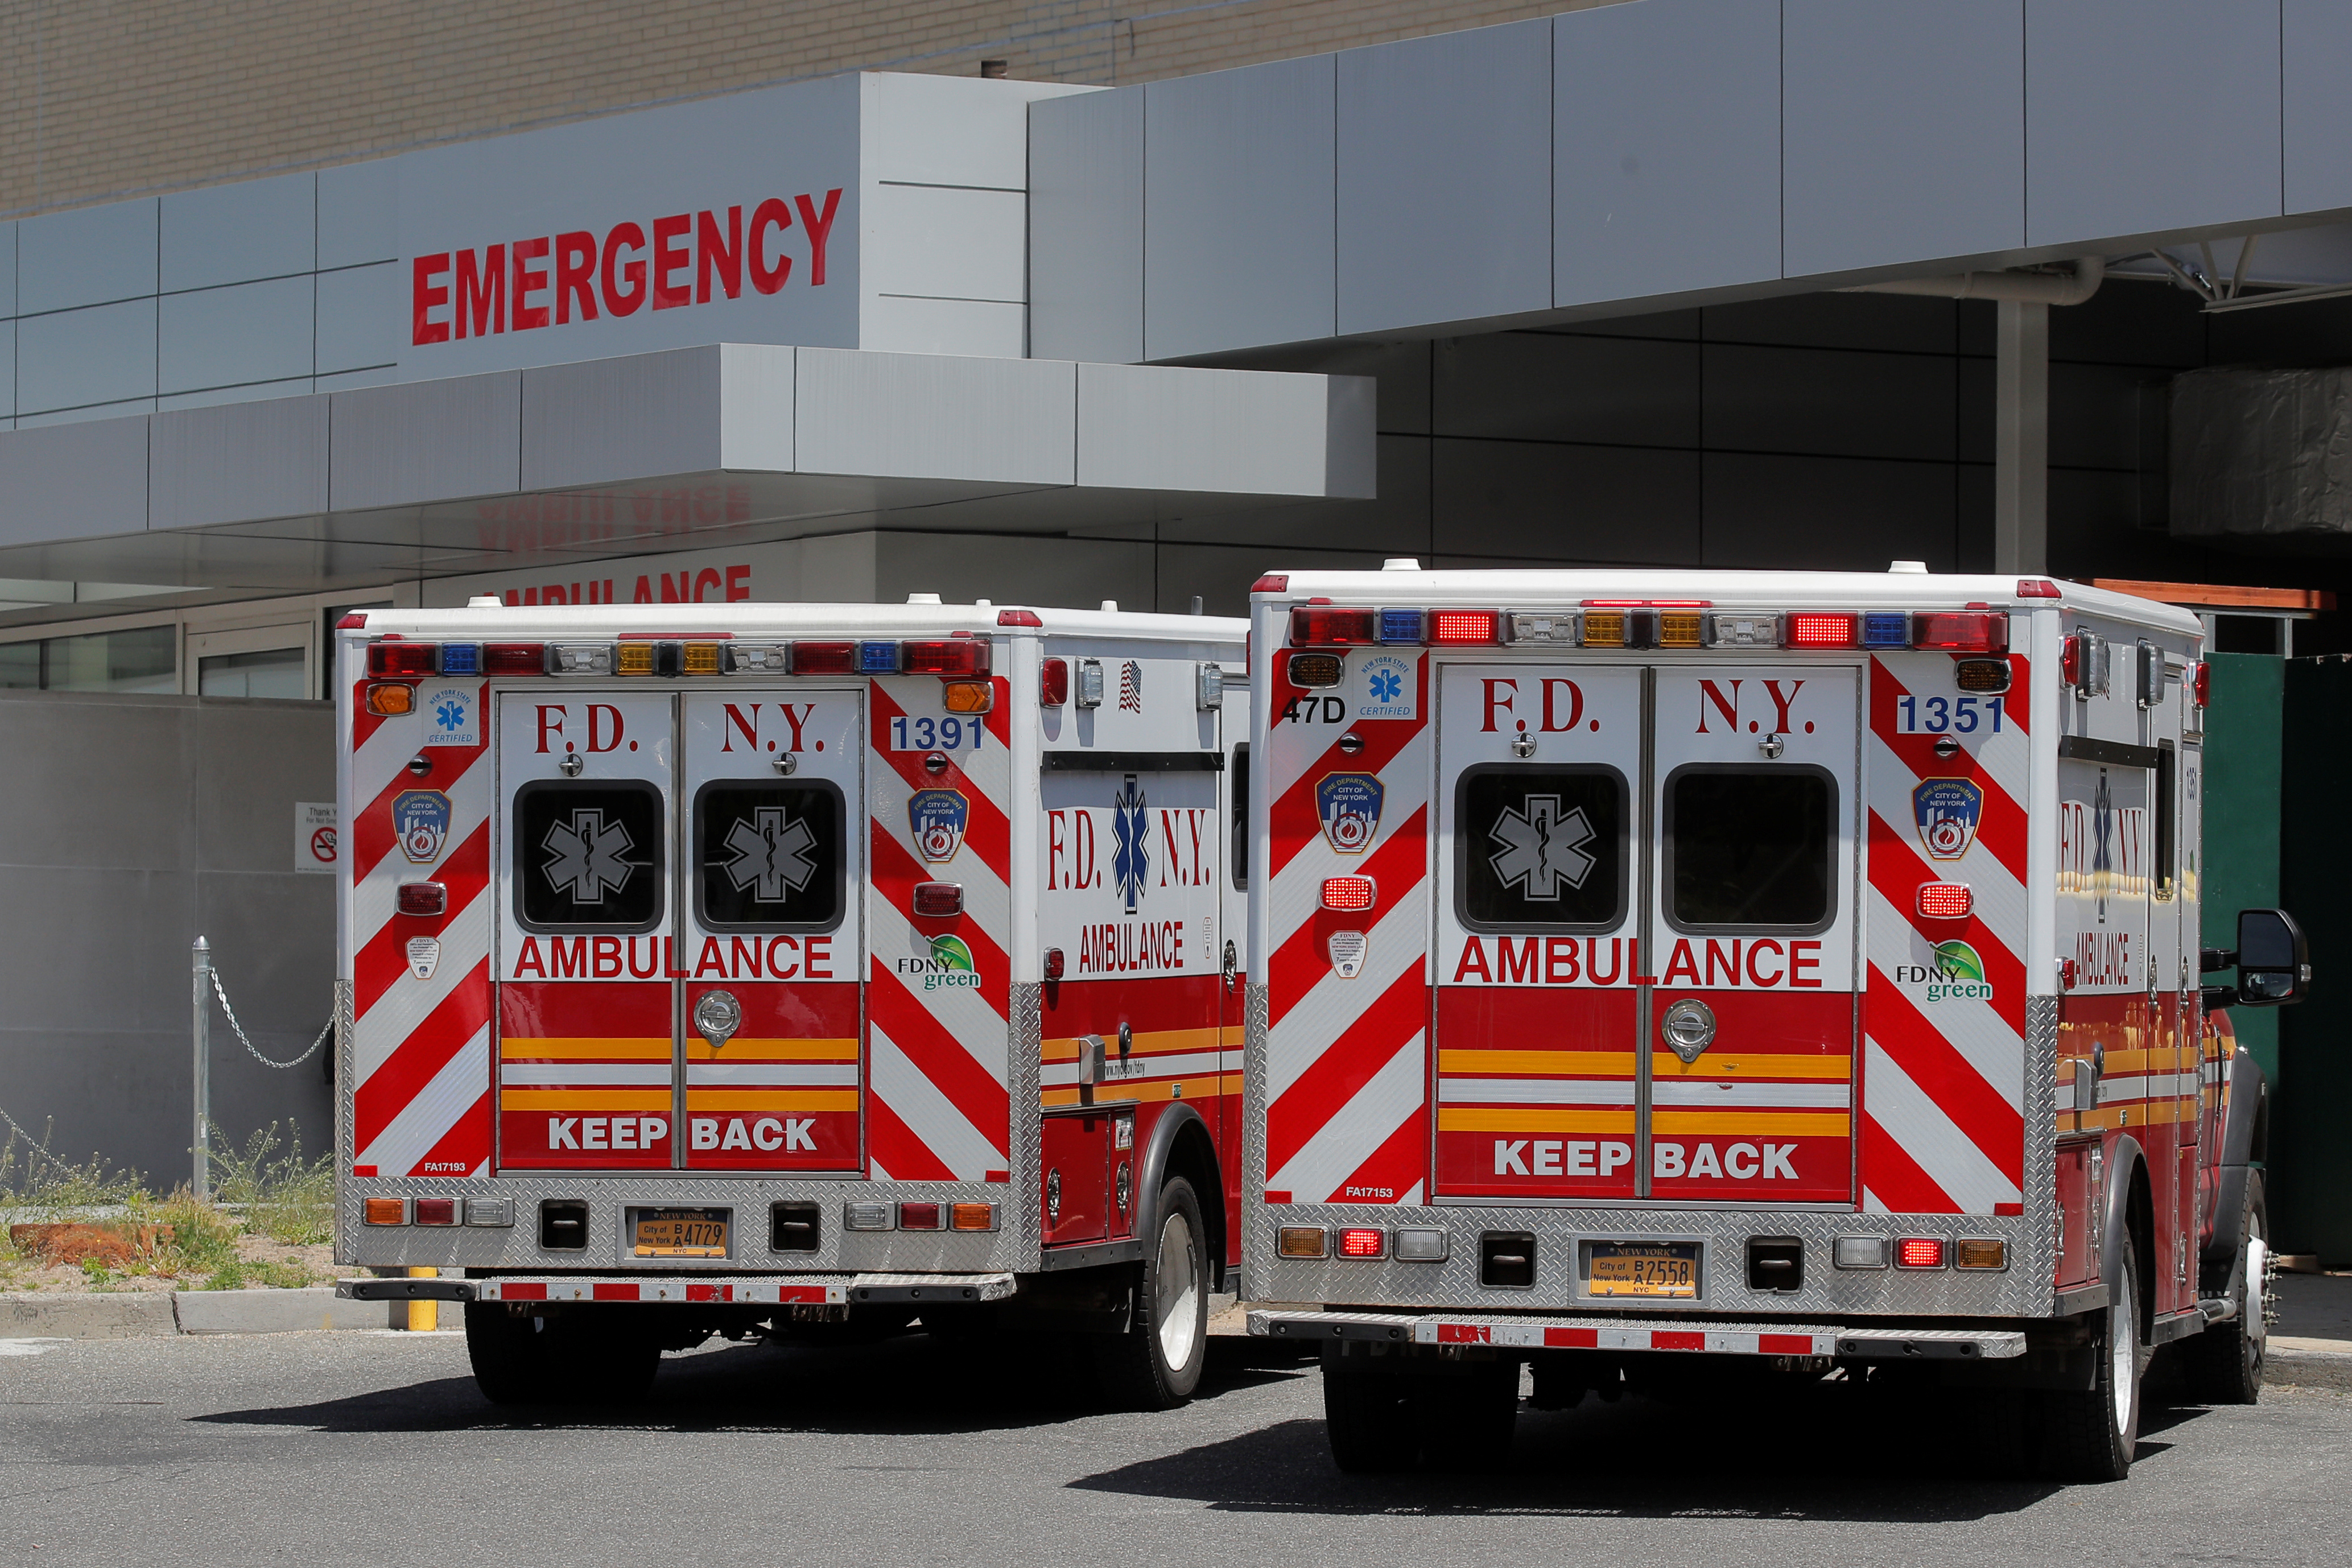 New York City Fire Department (FDNY) Ambulances are parked at the emergency entrance of St. John's Episcopal Hospital, during the outbreak of the coronavirus disease (COVID-19), in the Far Rockaway  section of Queens, New York